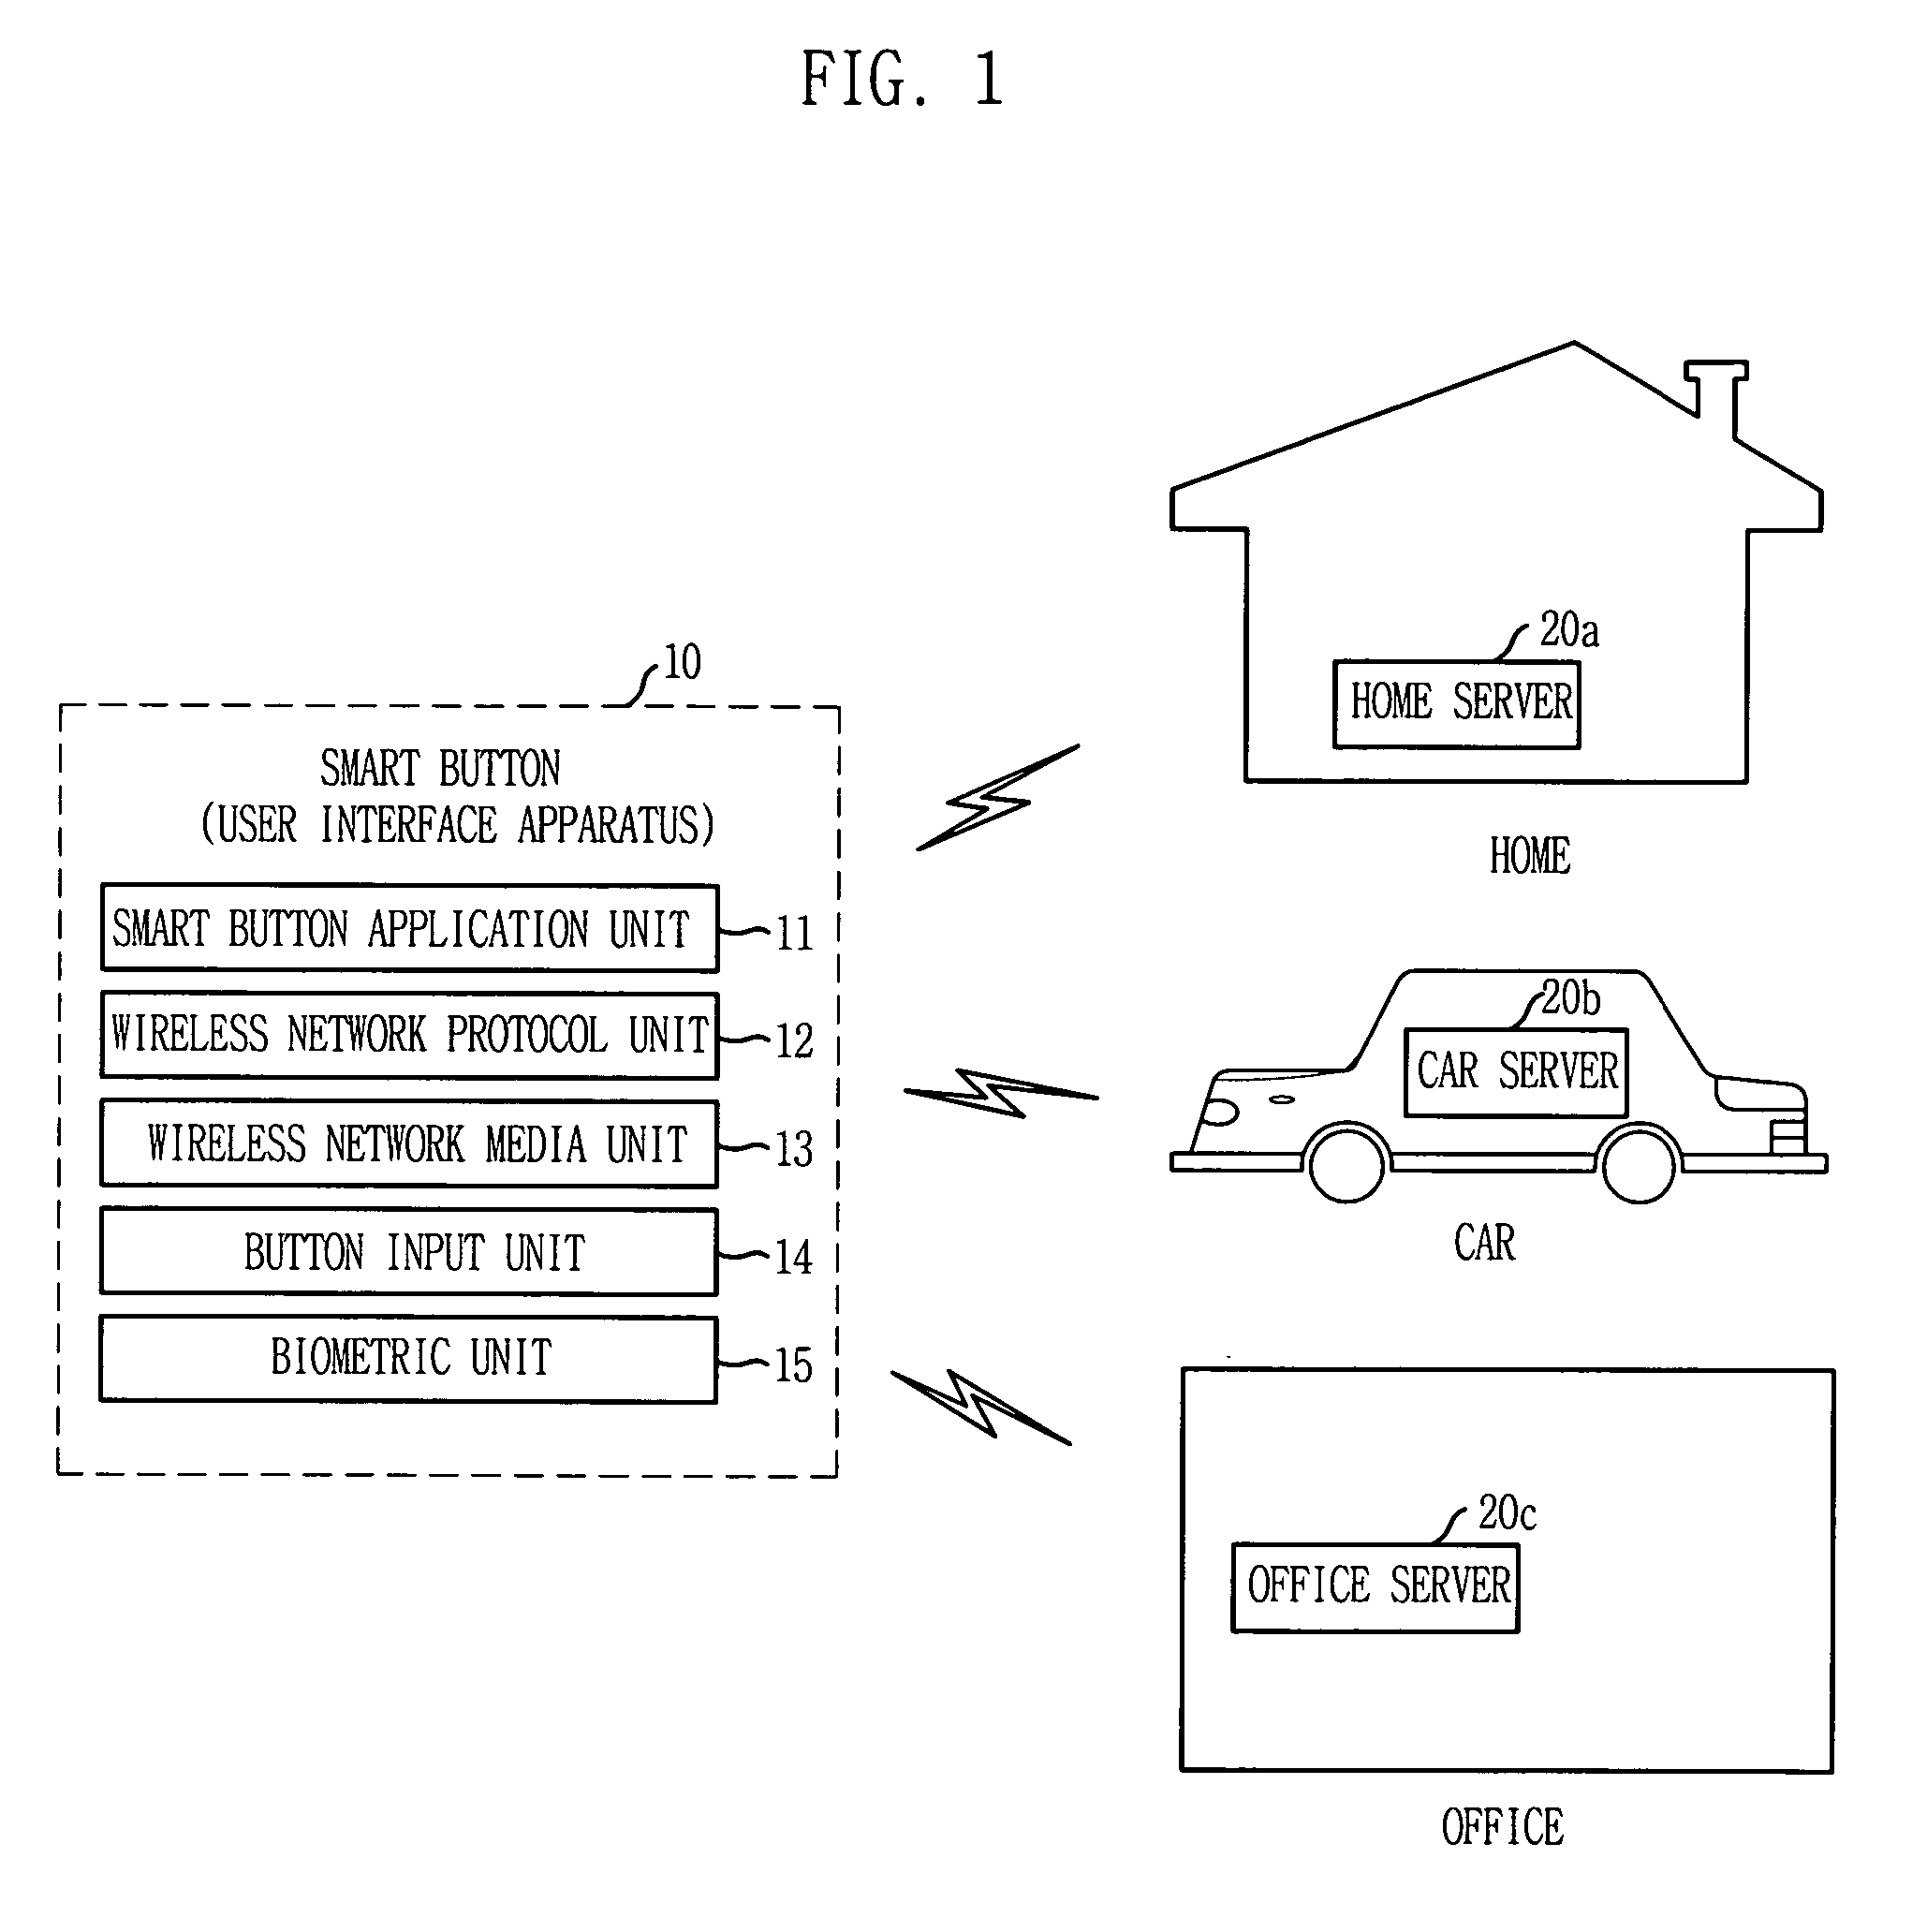 User interface apparatus for context-aware environments, device controlling apparatus and method thereof